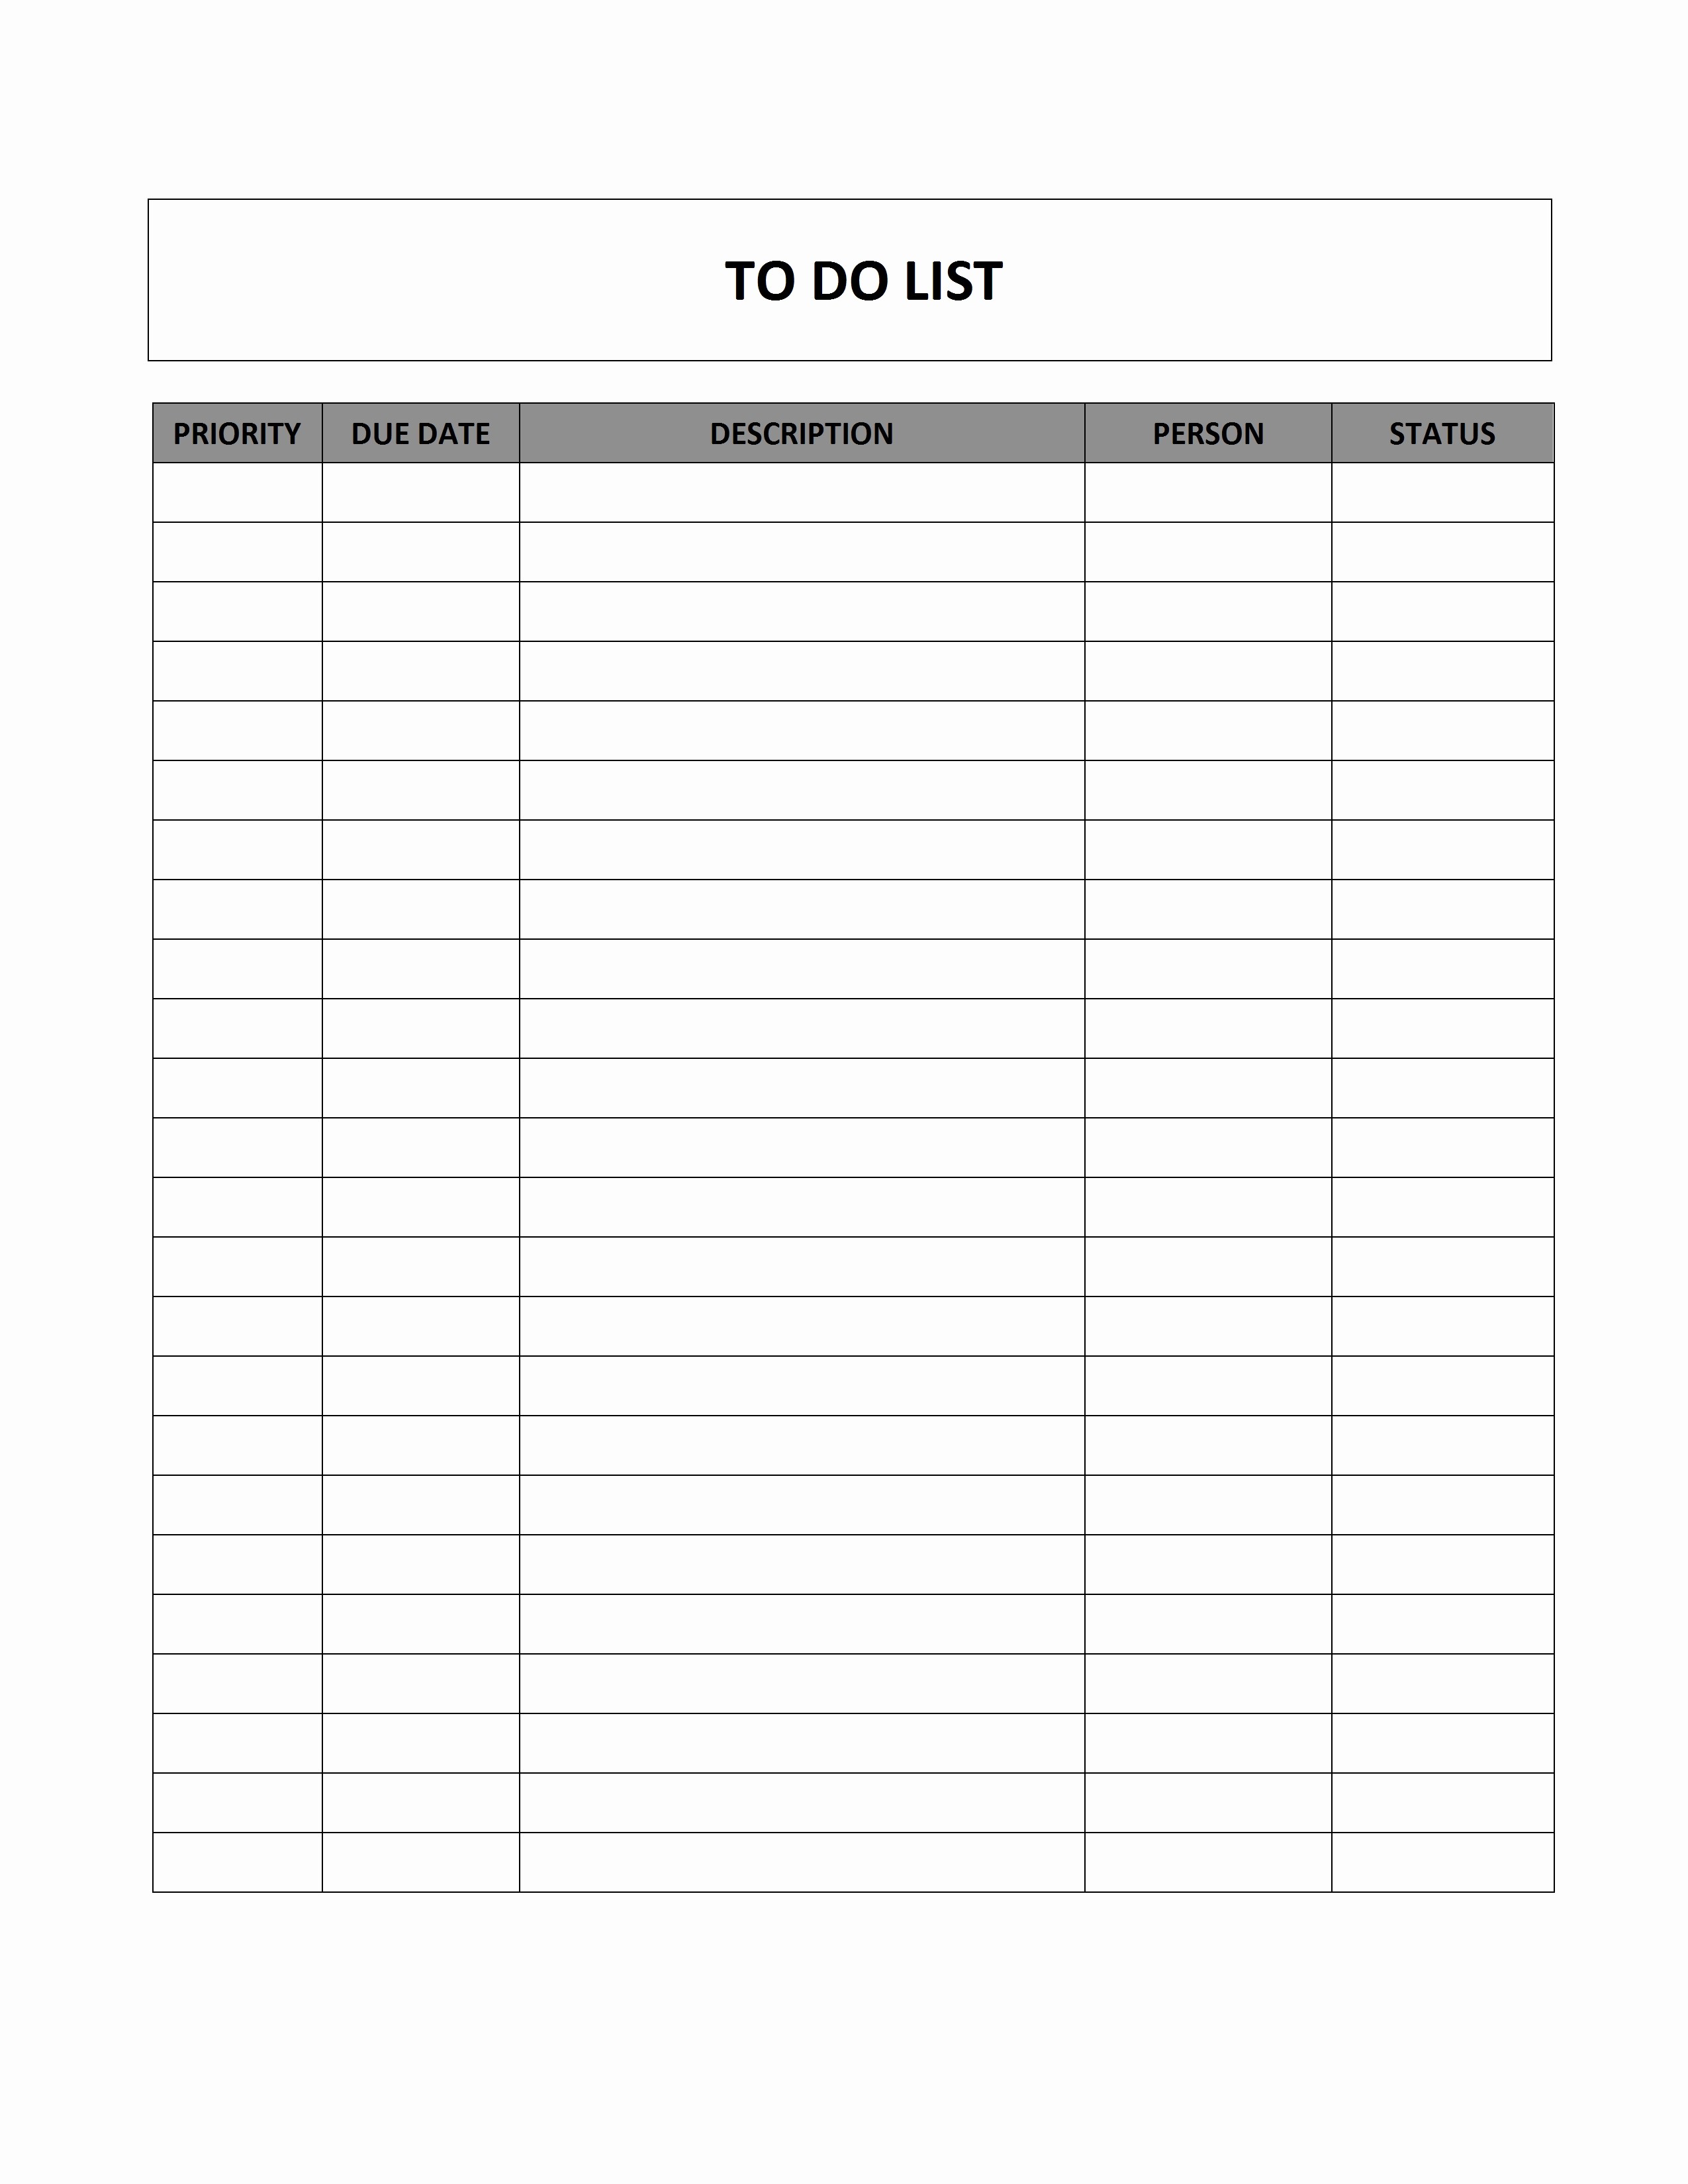 Things to Do Template Word Luxury to Do List Sample